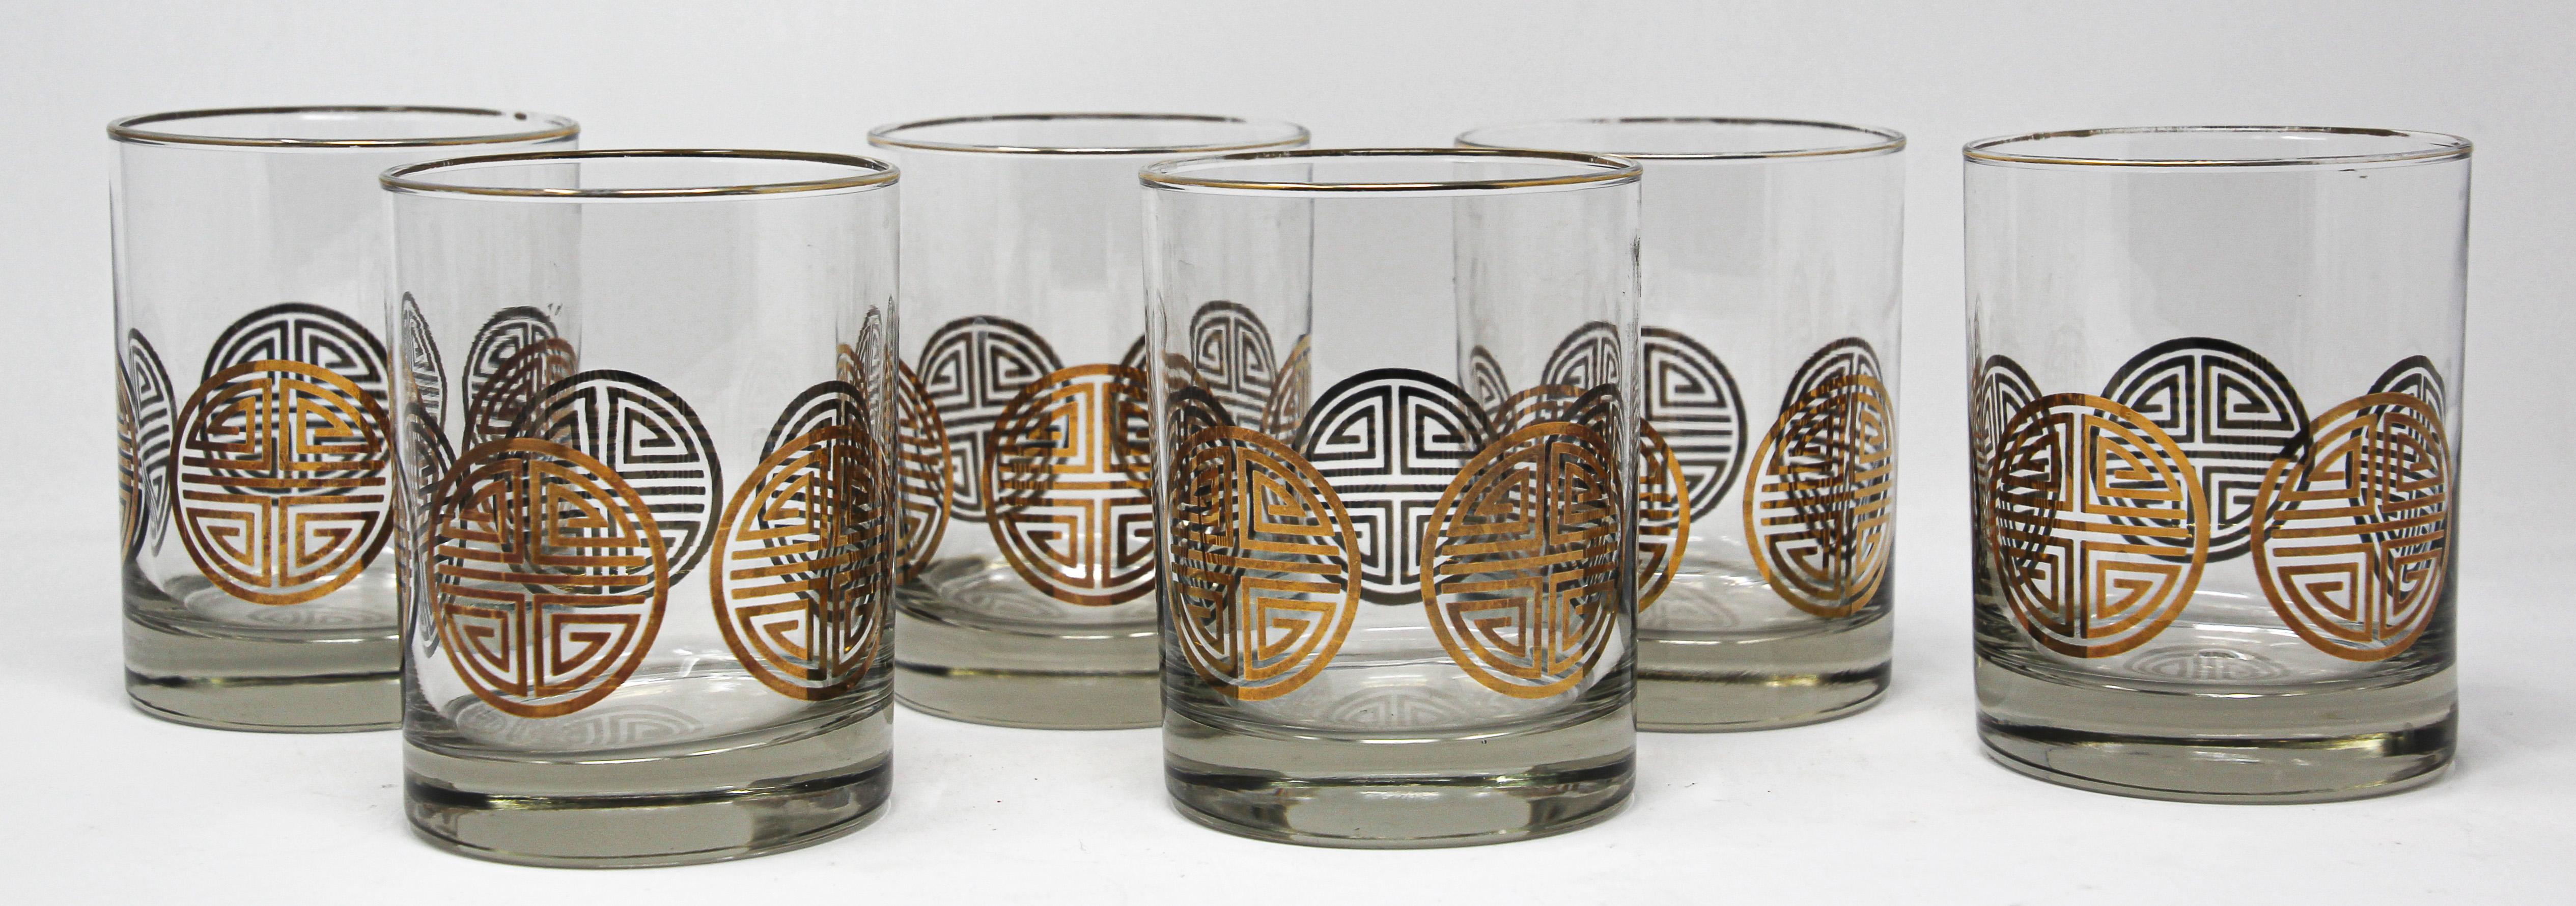 Elegant exquisite vintage set of six rock glasses designed by Georges Briard.
They will create a dramatic display for a back bar or table setting.
Midcentury low ball cocktail glasses decorated with 22-karat gold leaf pattern.
Size: 3 1/4